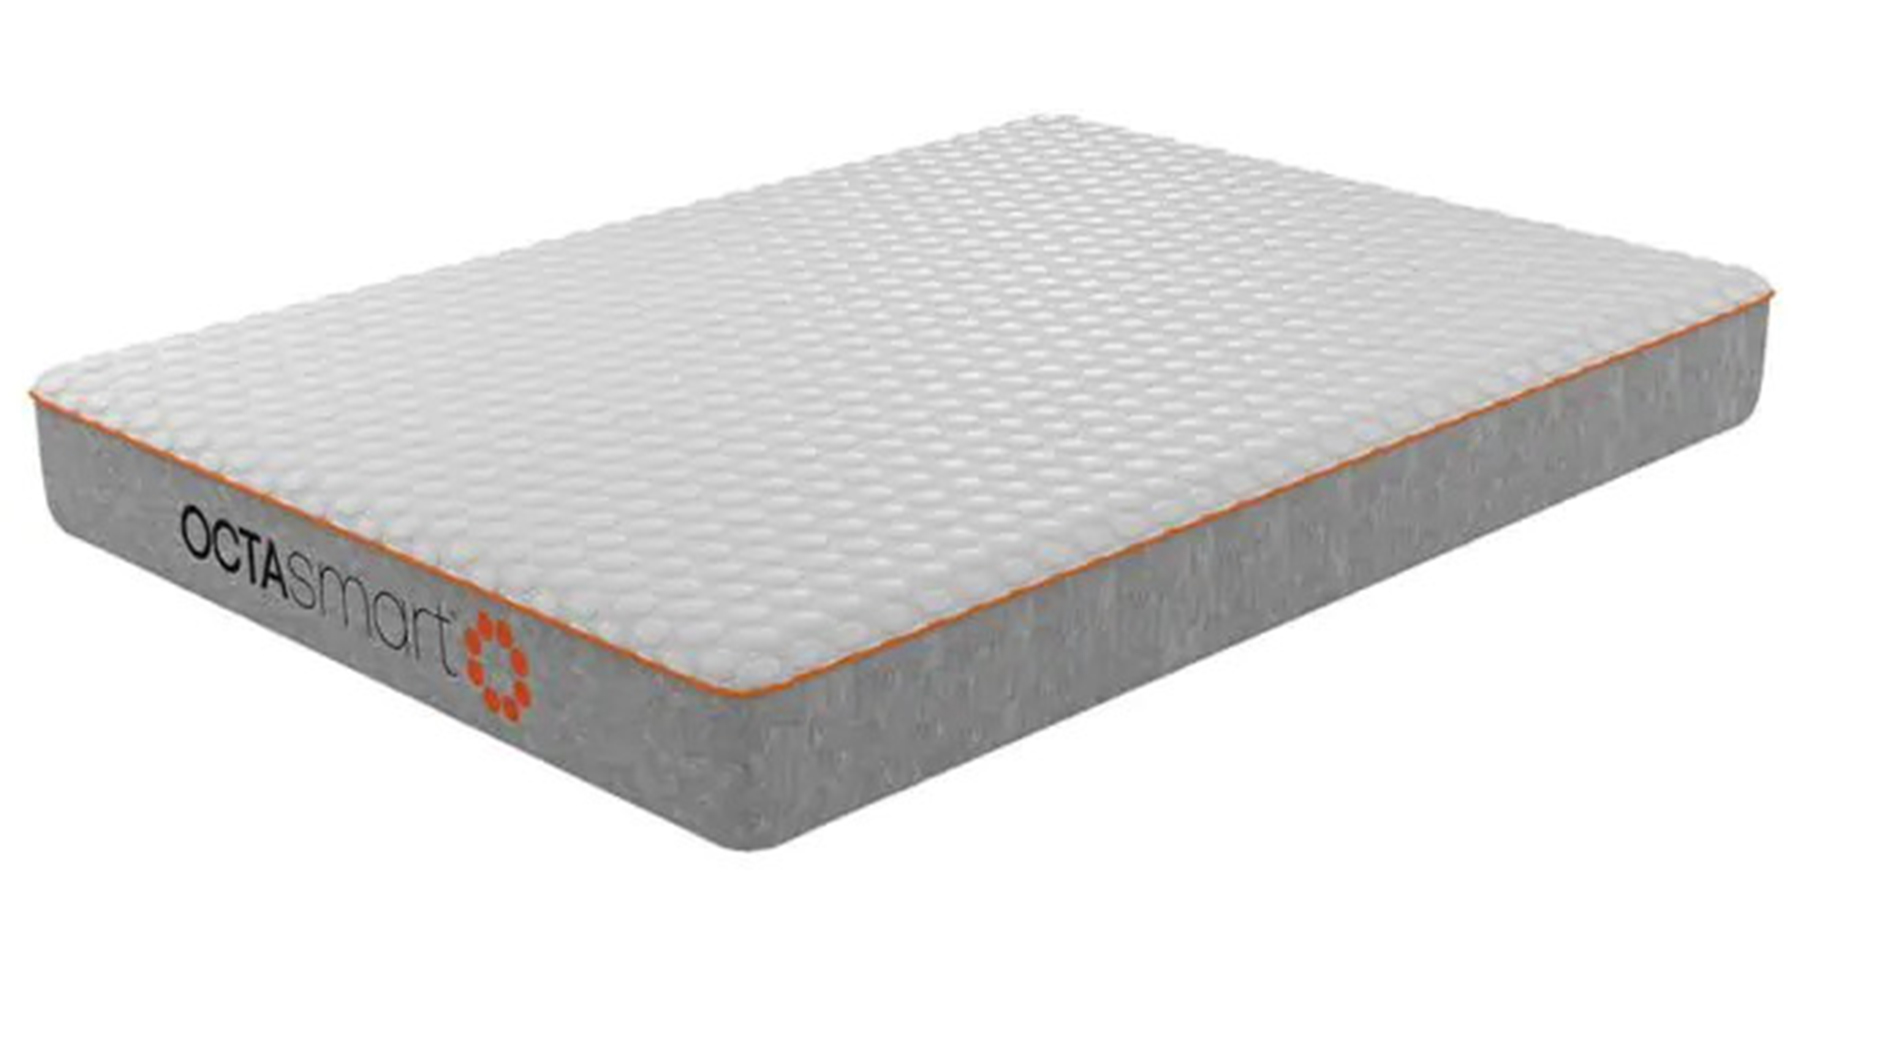 Best Dormeo mattress sales and discount codes in 2021 save up to £750